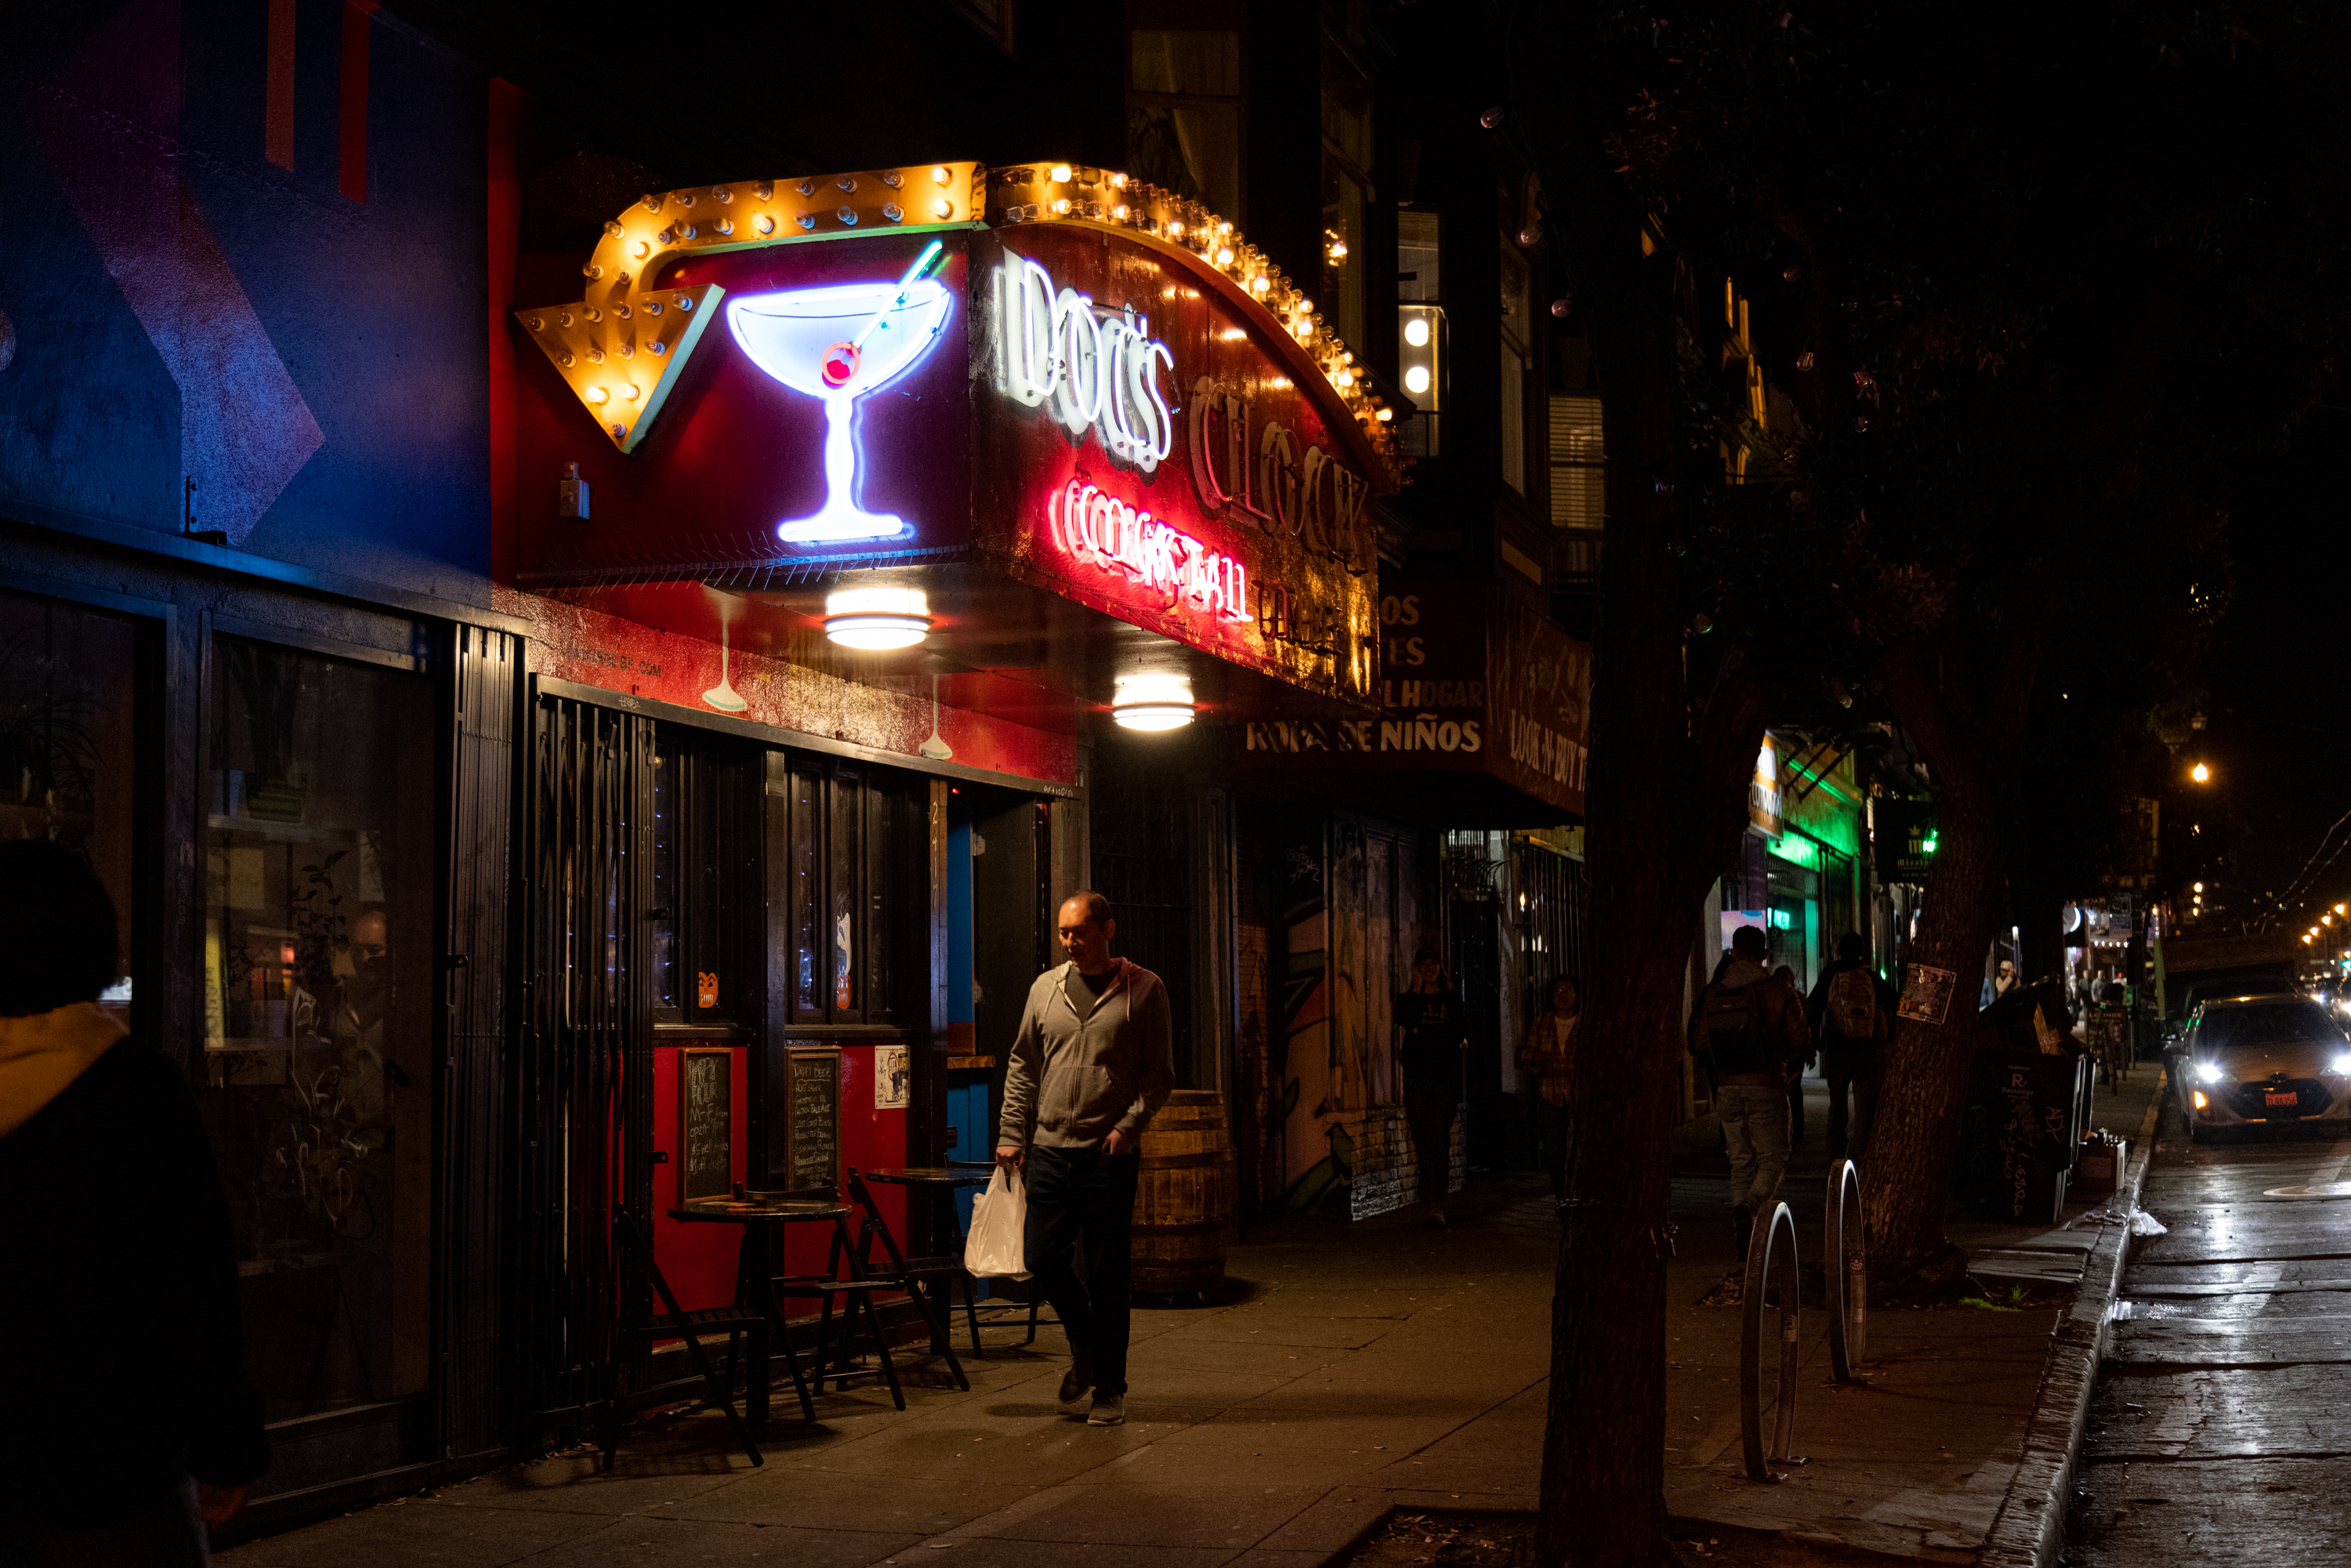 A street view of a person walking on the sidewalk below a neon sign that has a cocktail on it and reads &quot;DOC'S&quot;